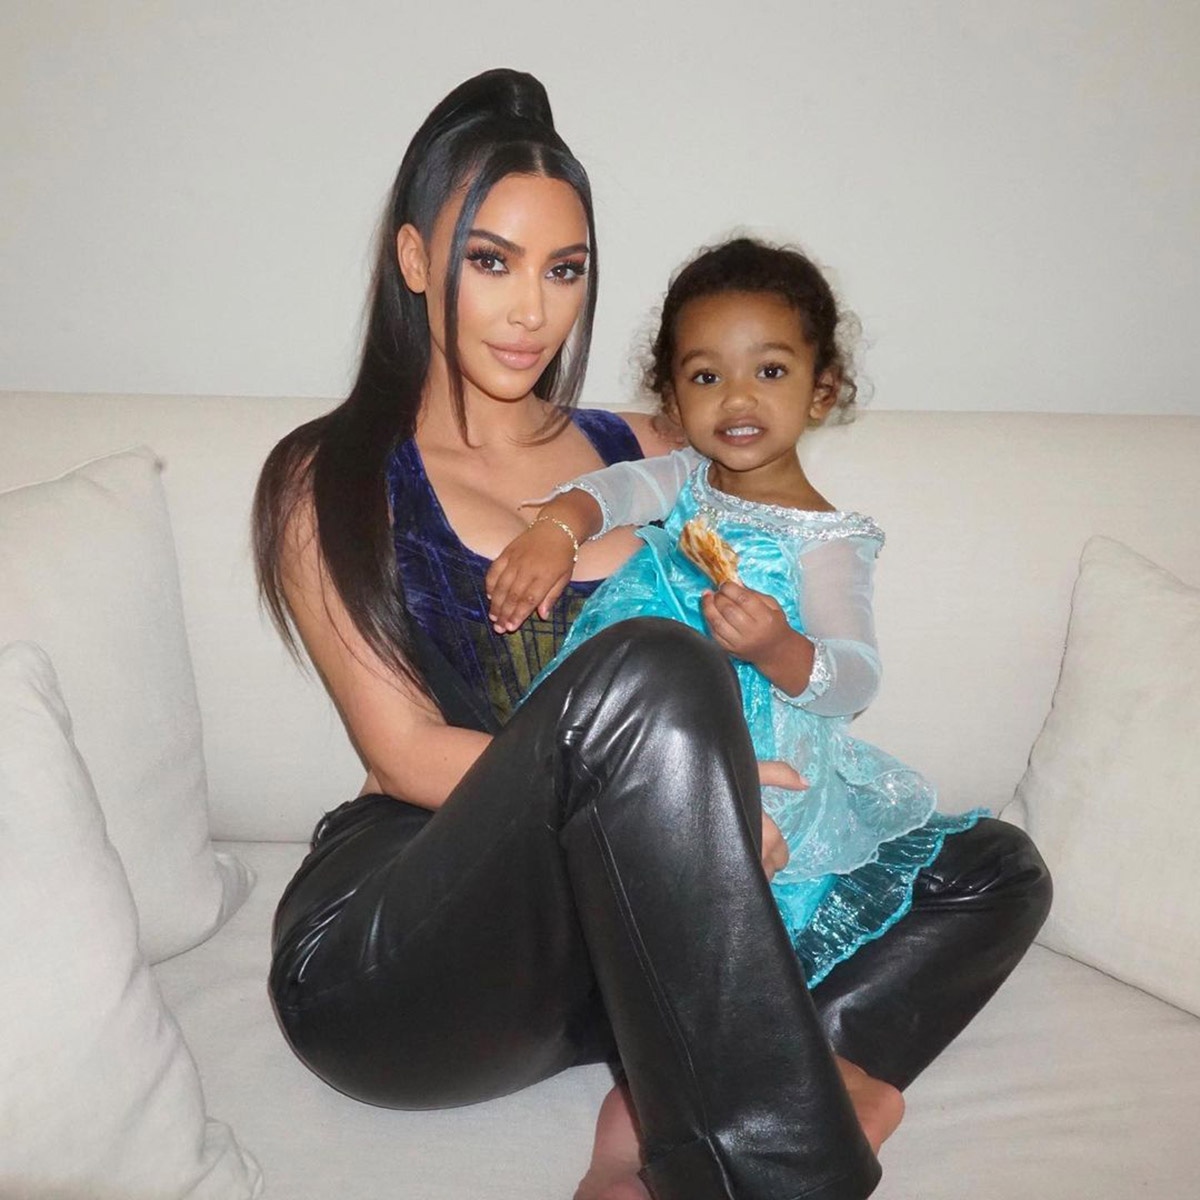 likhoa kim kardashian surprised fans when she first shared rare sweet moments of little girl chicago west she is everything i m most proud of 655dc142575a7 Kim Kardashian Surprised Fans When She First Shared Rare Sweet Moments Of Little Girl Chicago West: 'She Is Everything I'm Most Proud Of'